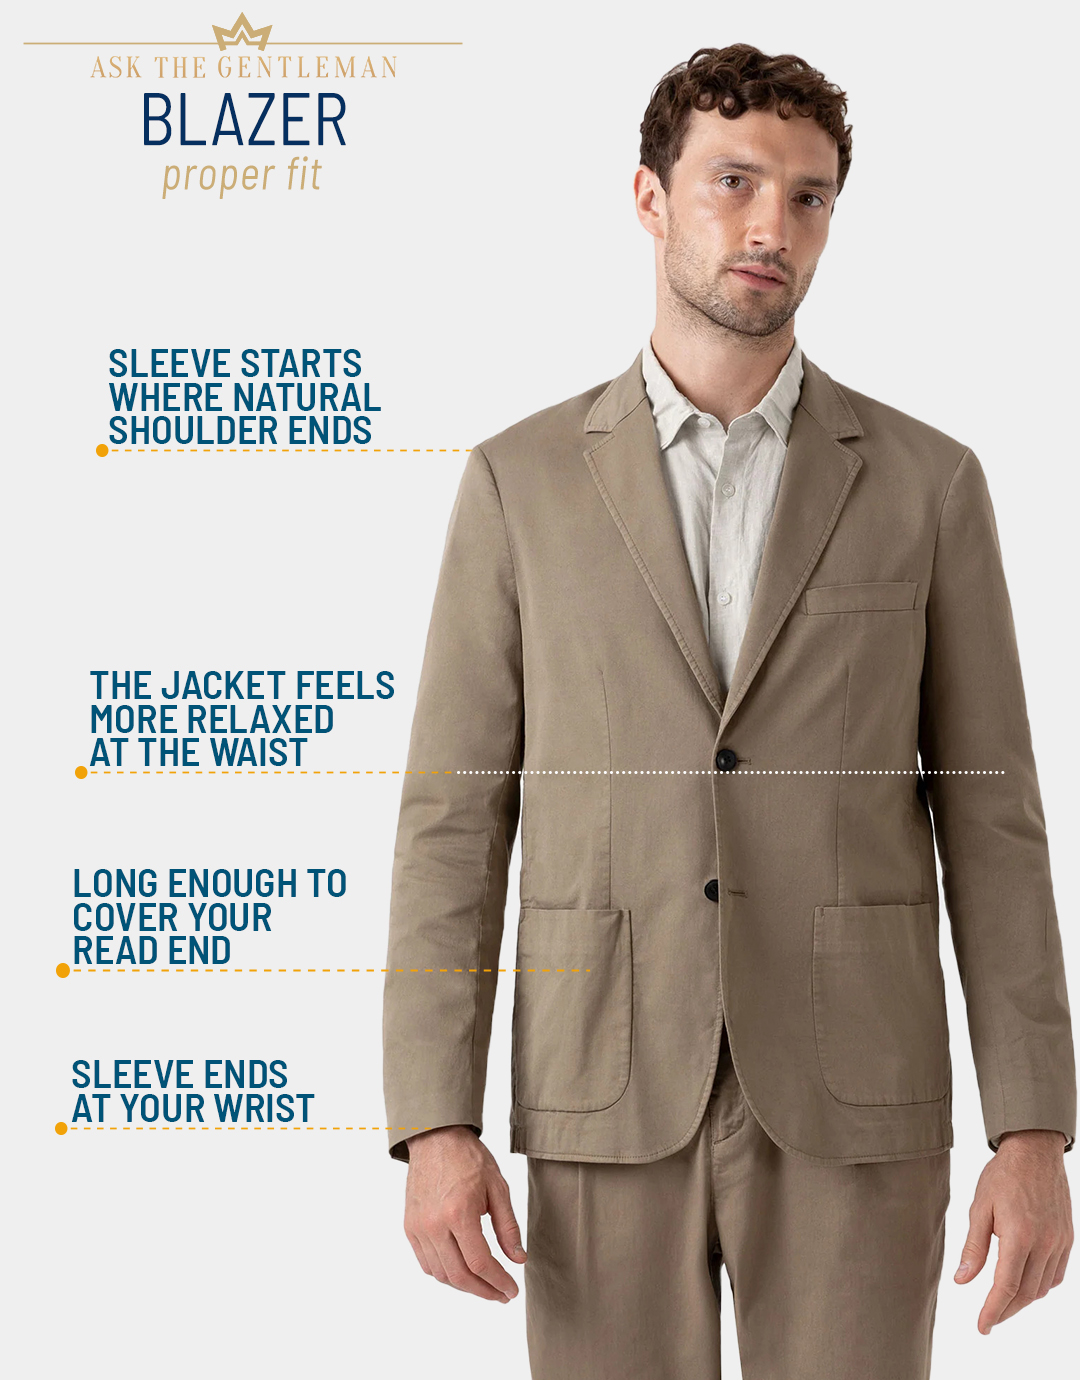 How should a blazer fit